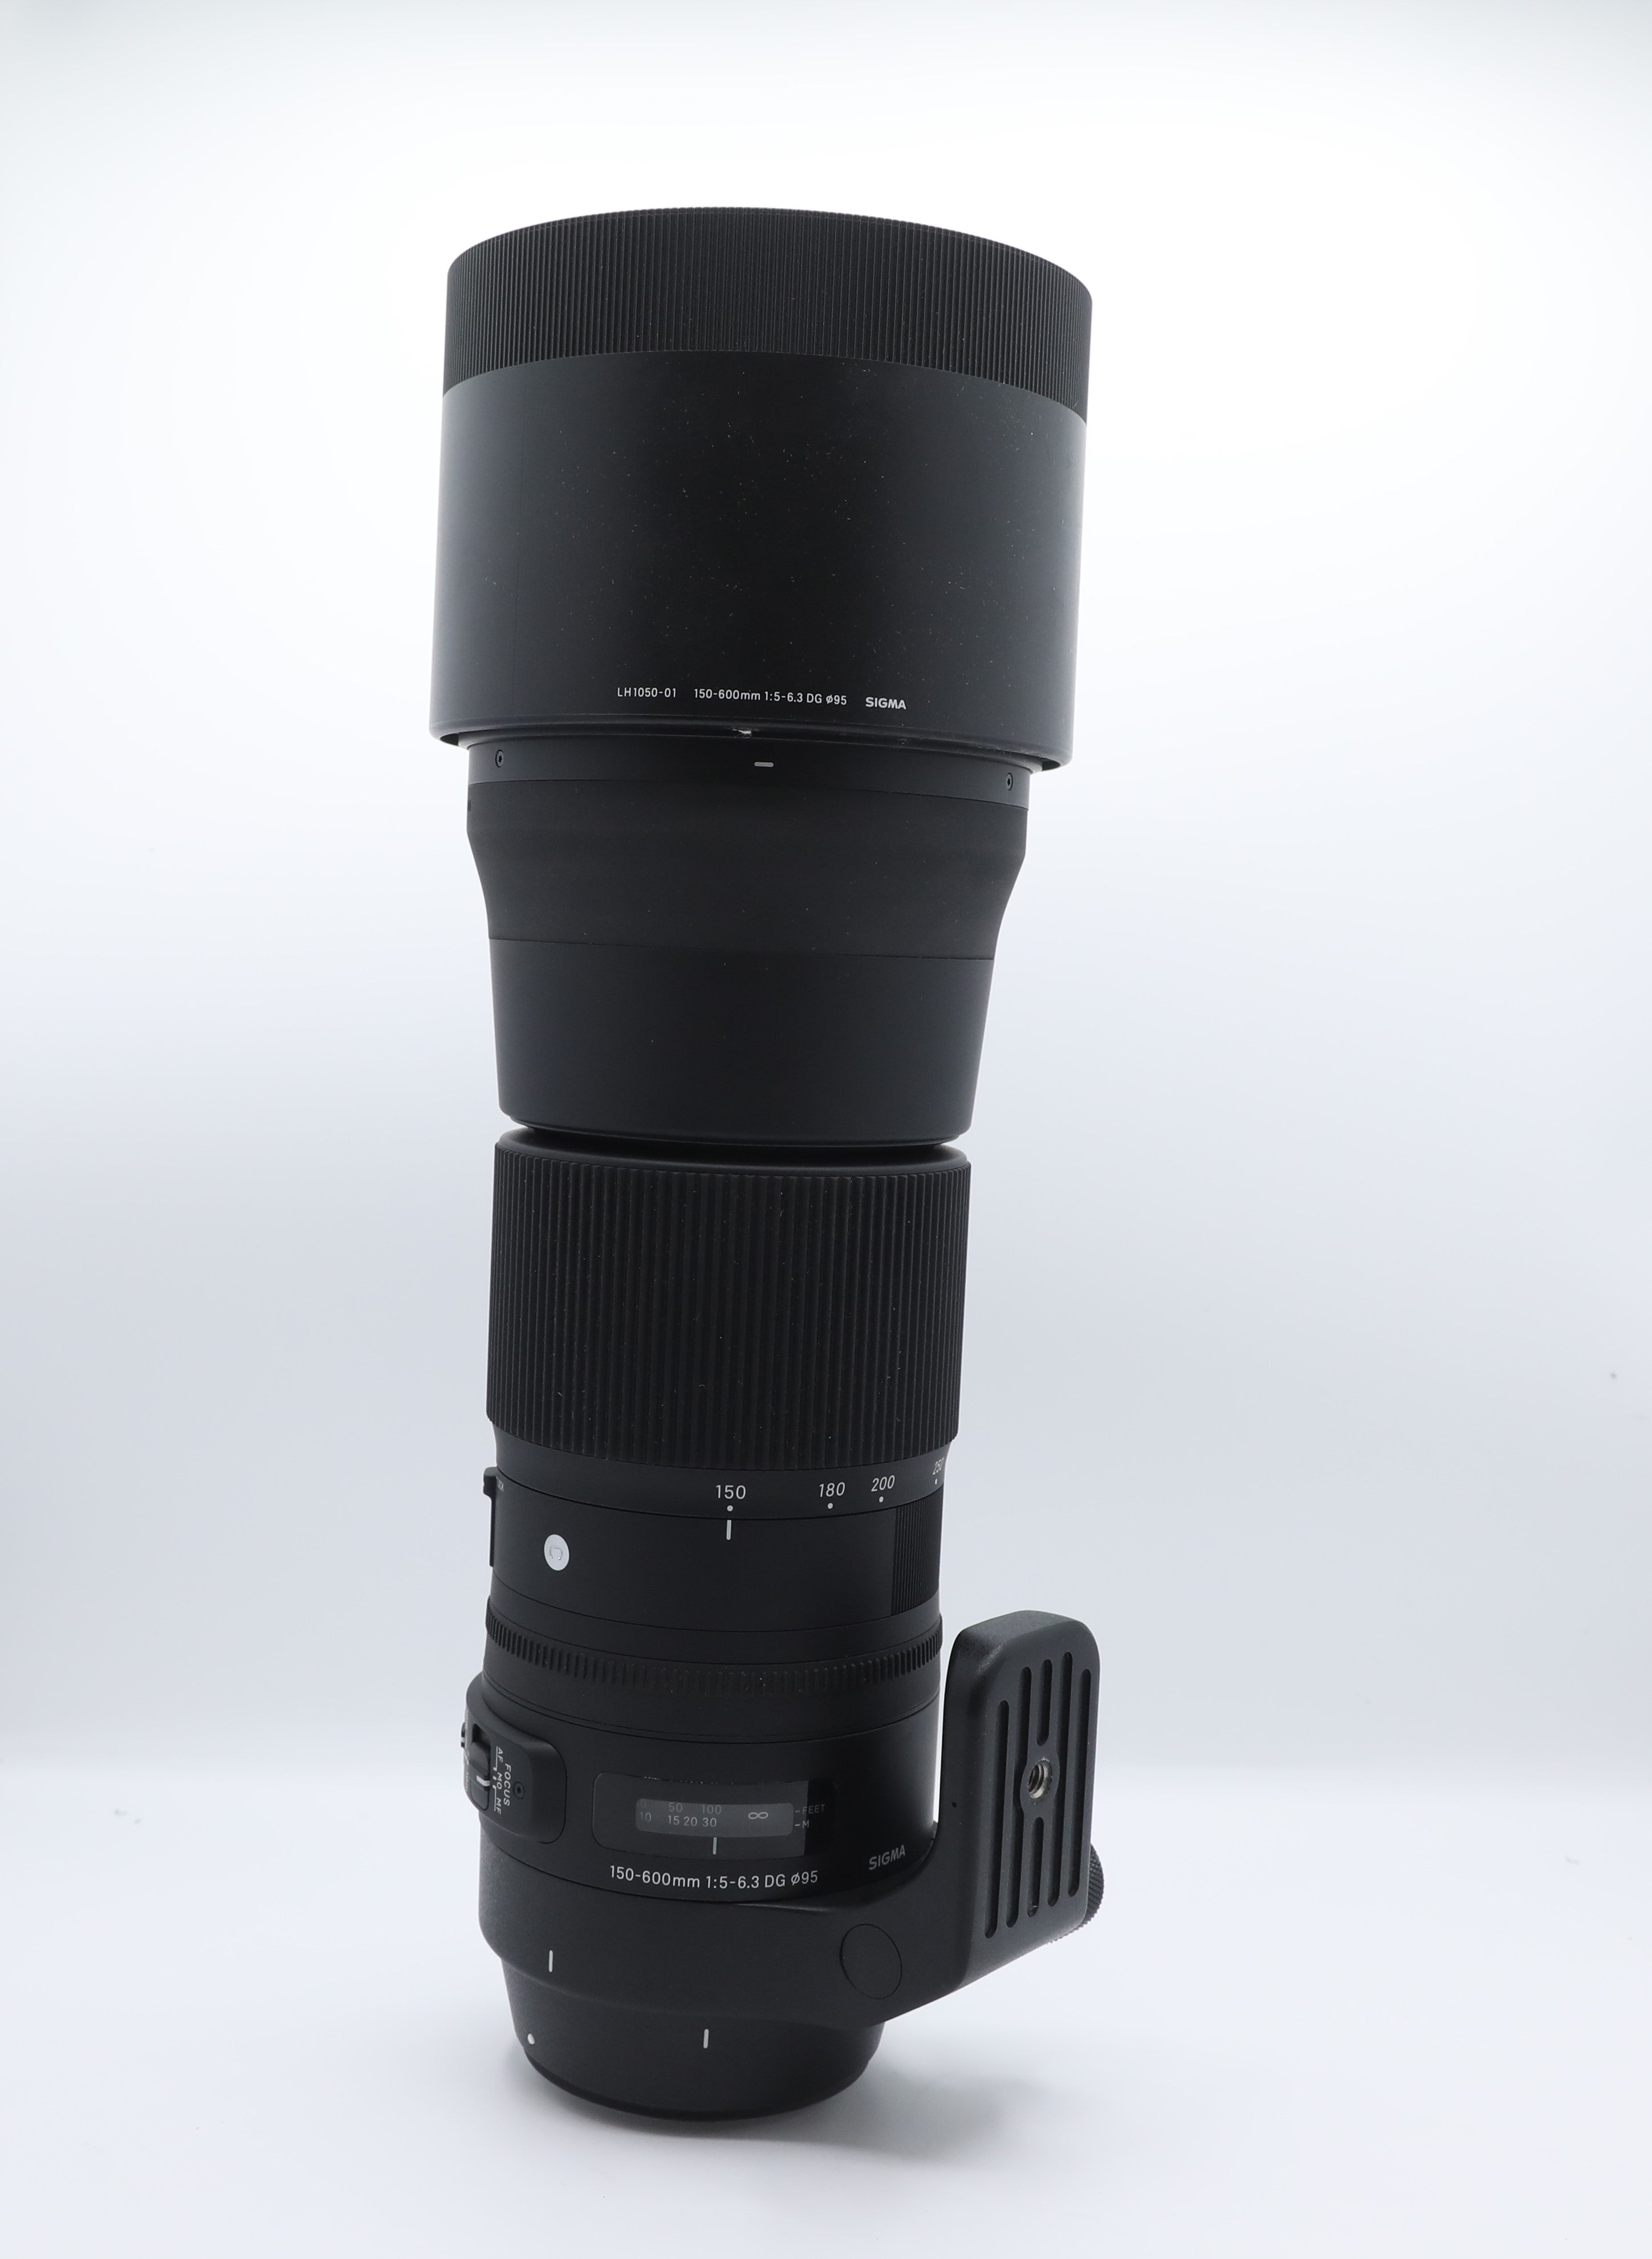 Used Sigma 150 600mm 1:5 6.3 dg For Canon